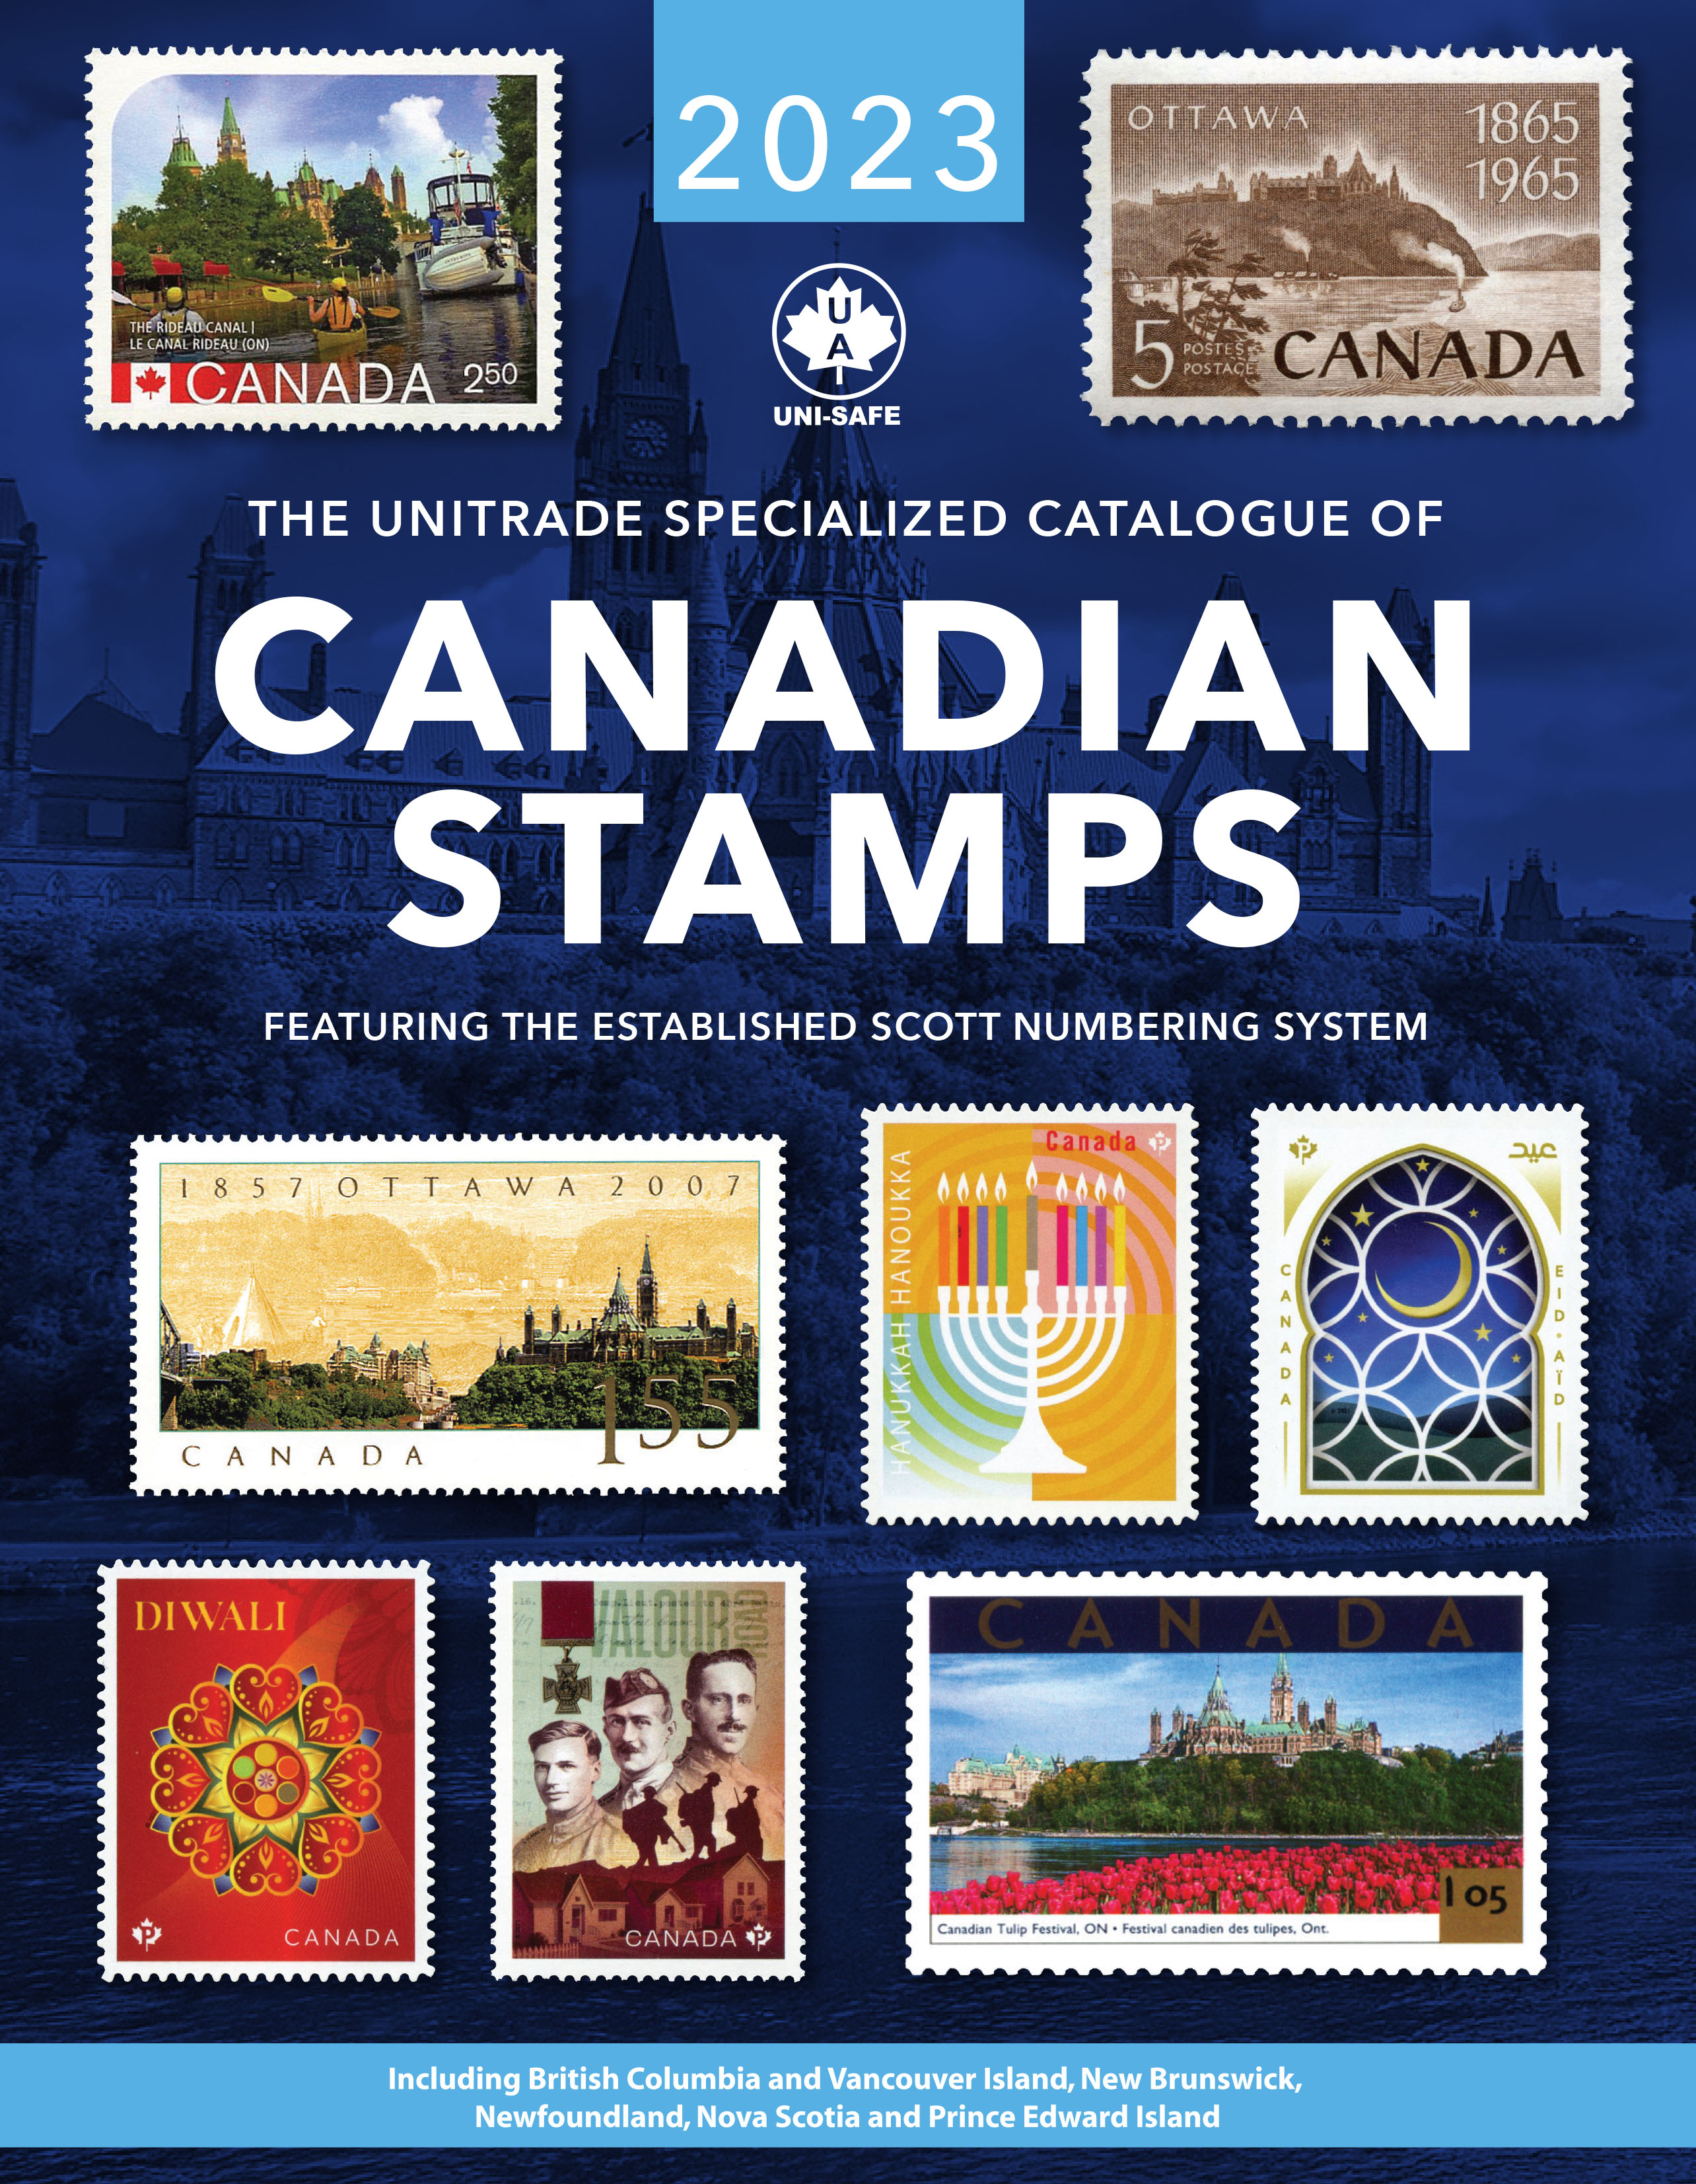 Unitrade Specialized Catalogue of Canadian Stamps